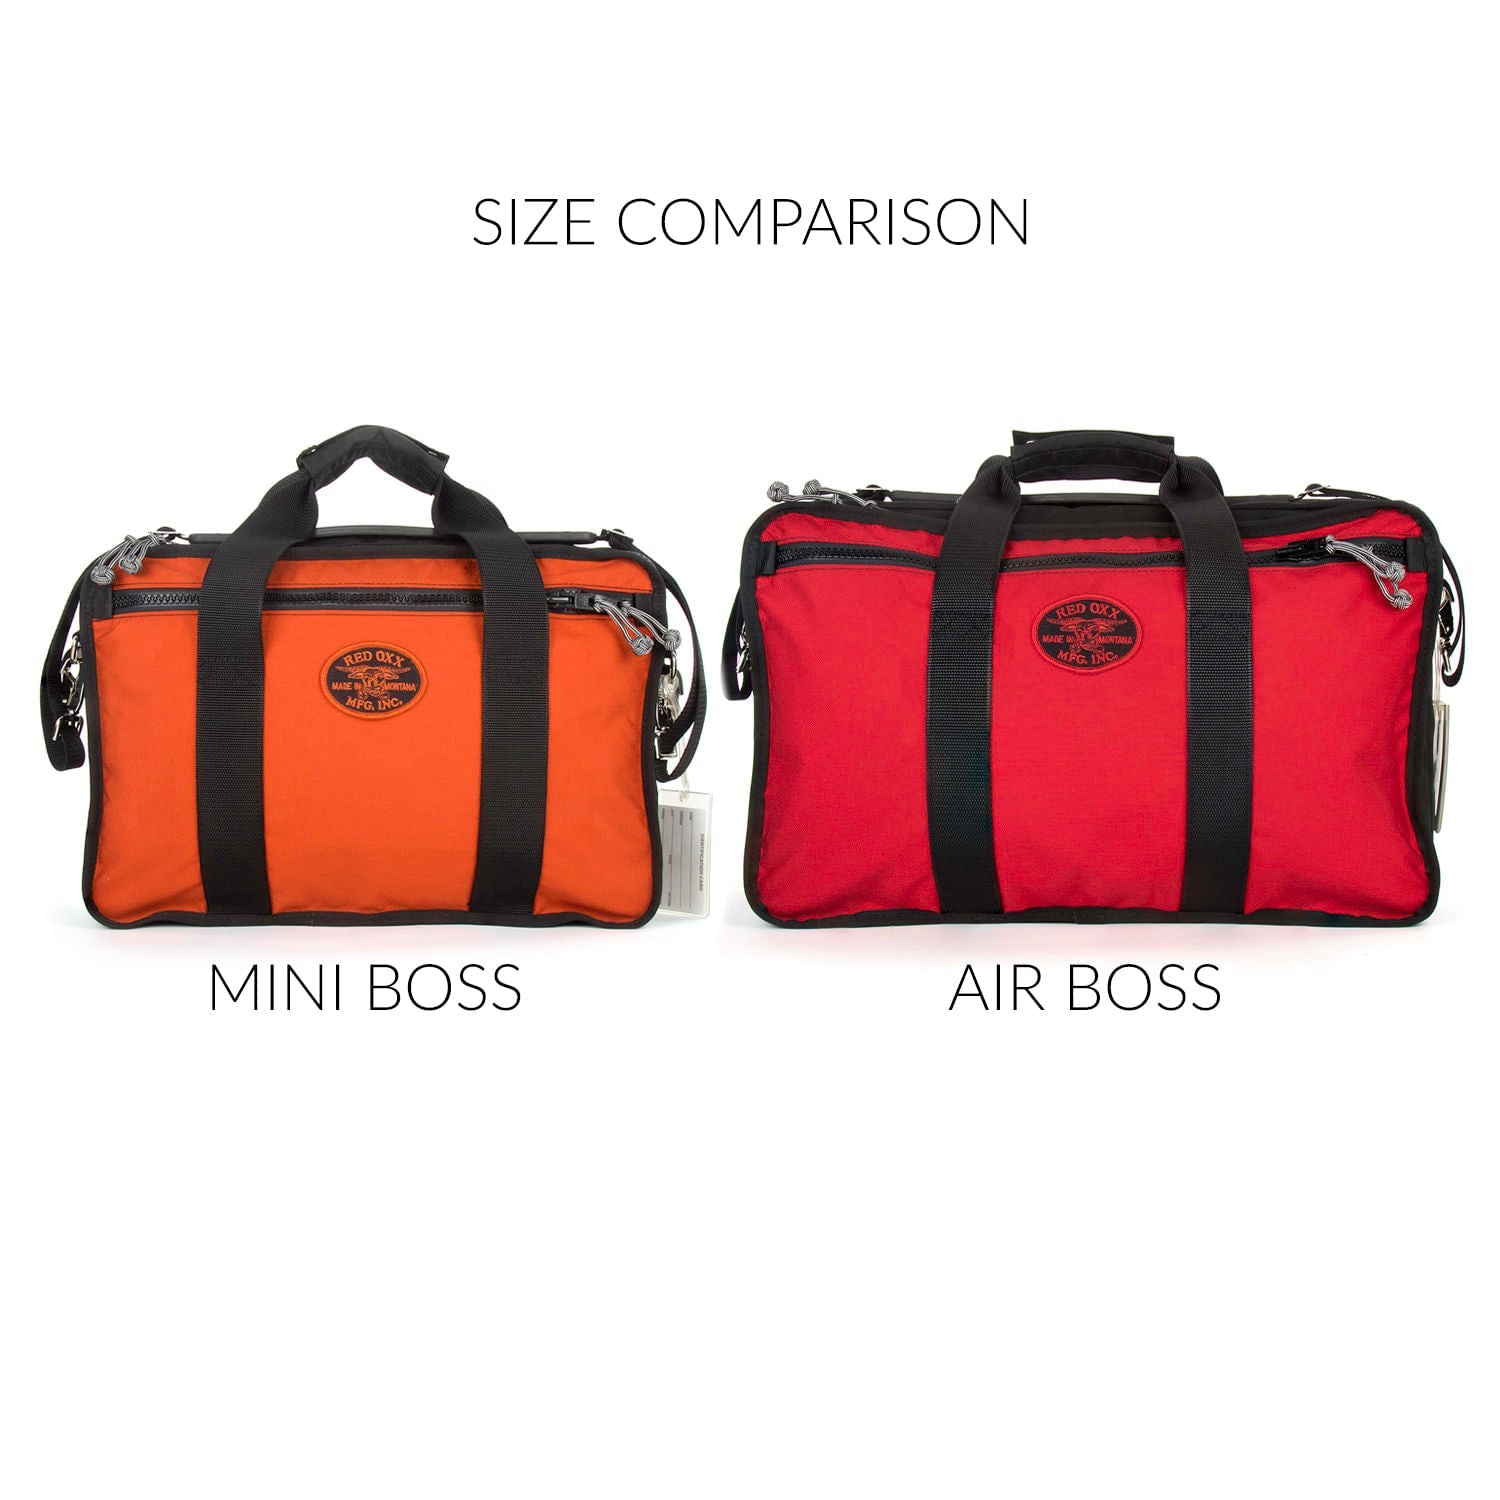 From left to right, Mini Boss to Air Boss comparison. 